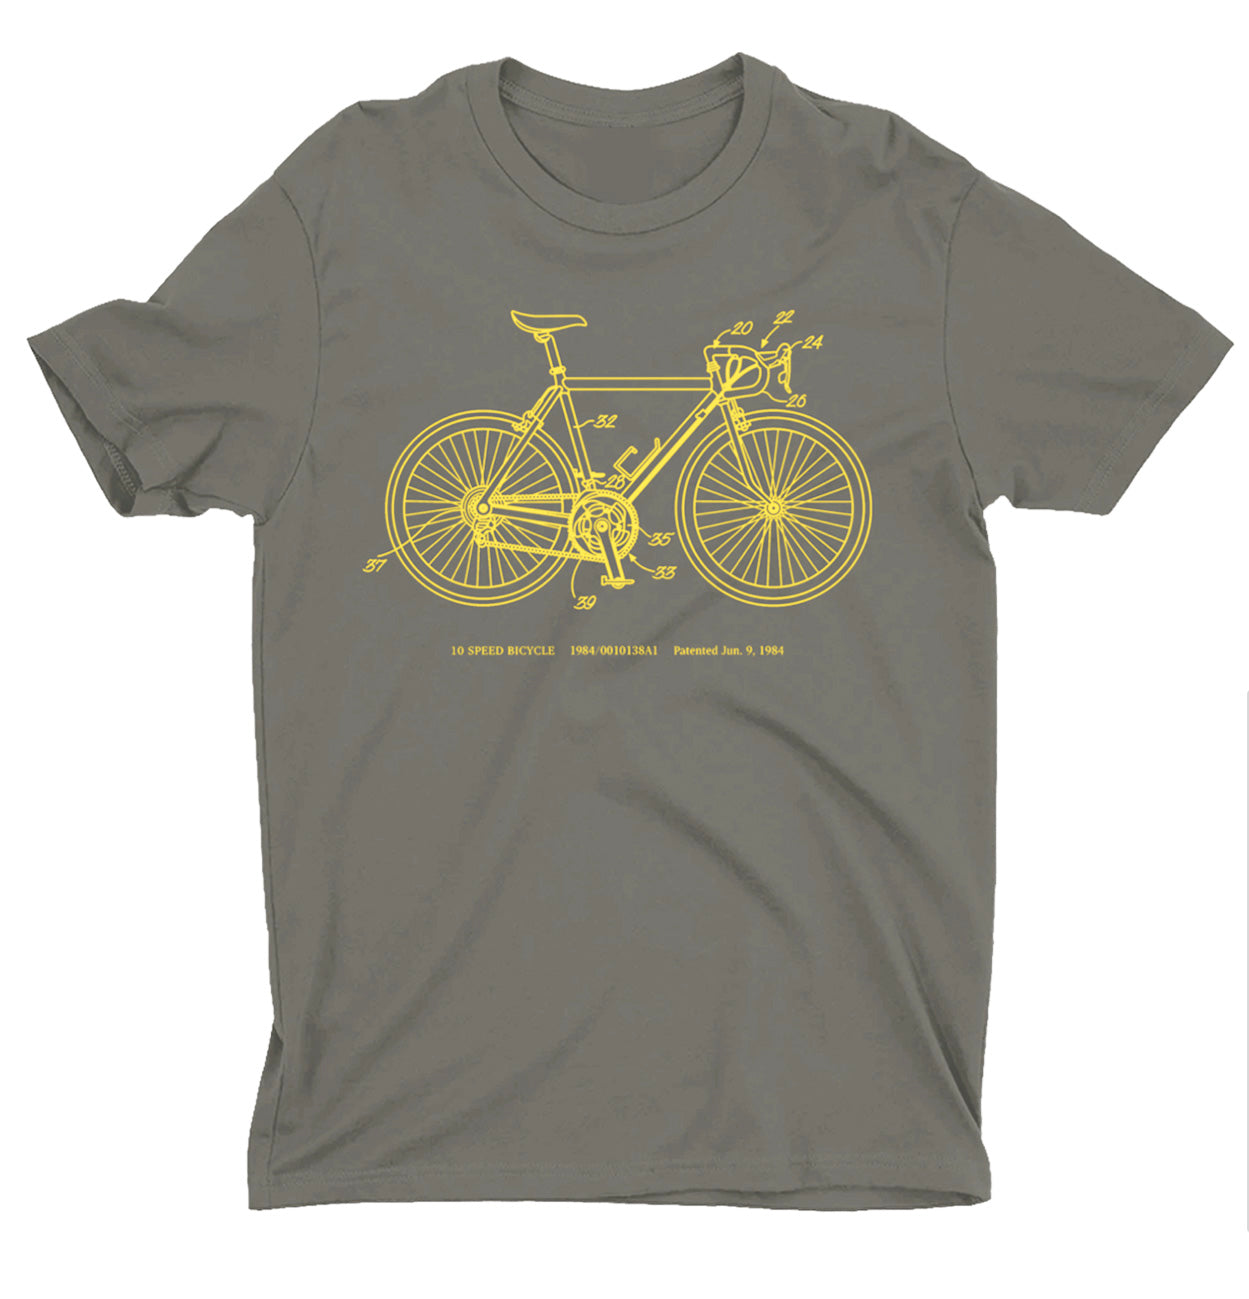 10-Speed Bicycle Patent T-shirt - Charcoal with Yellow Ink